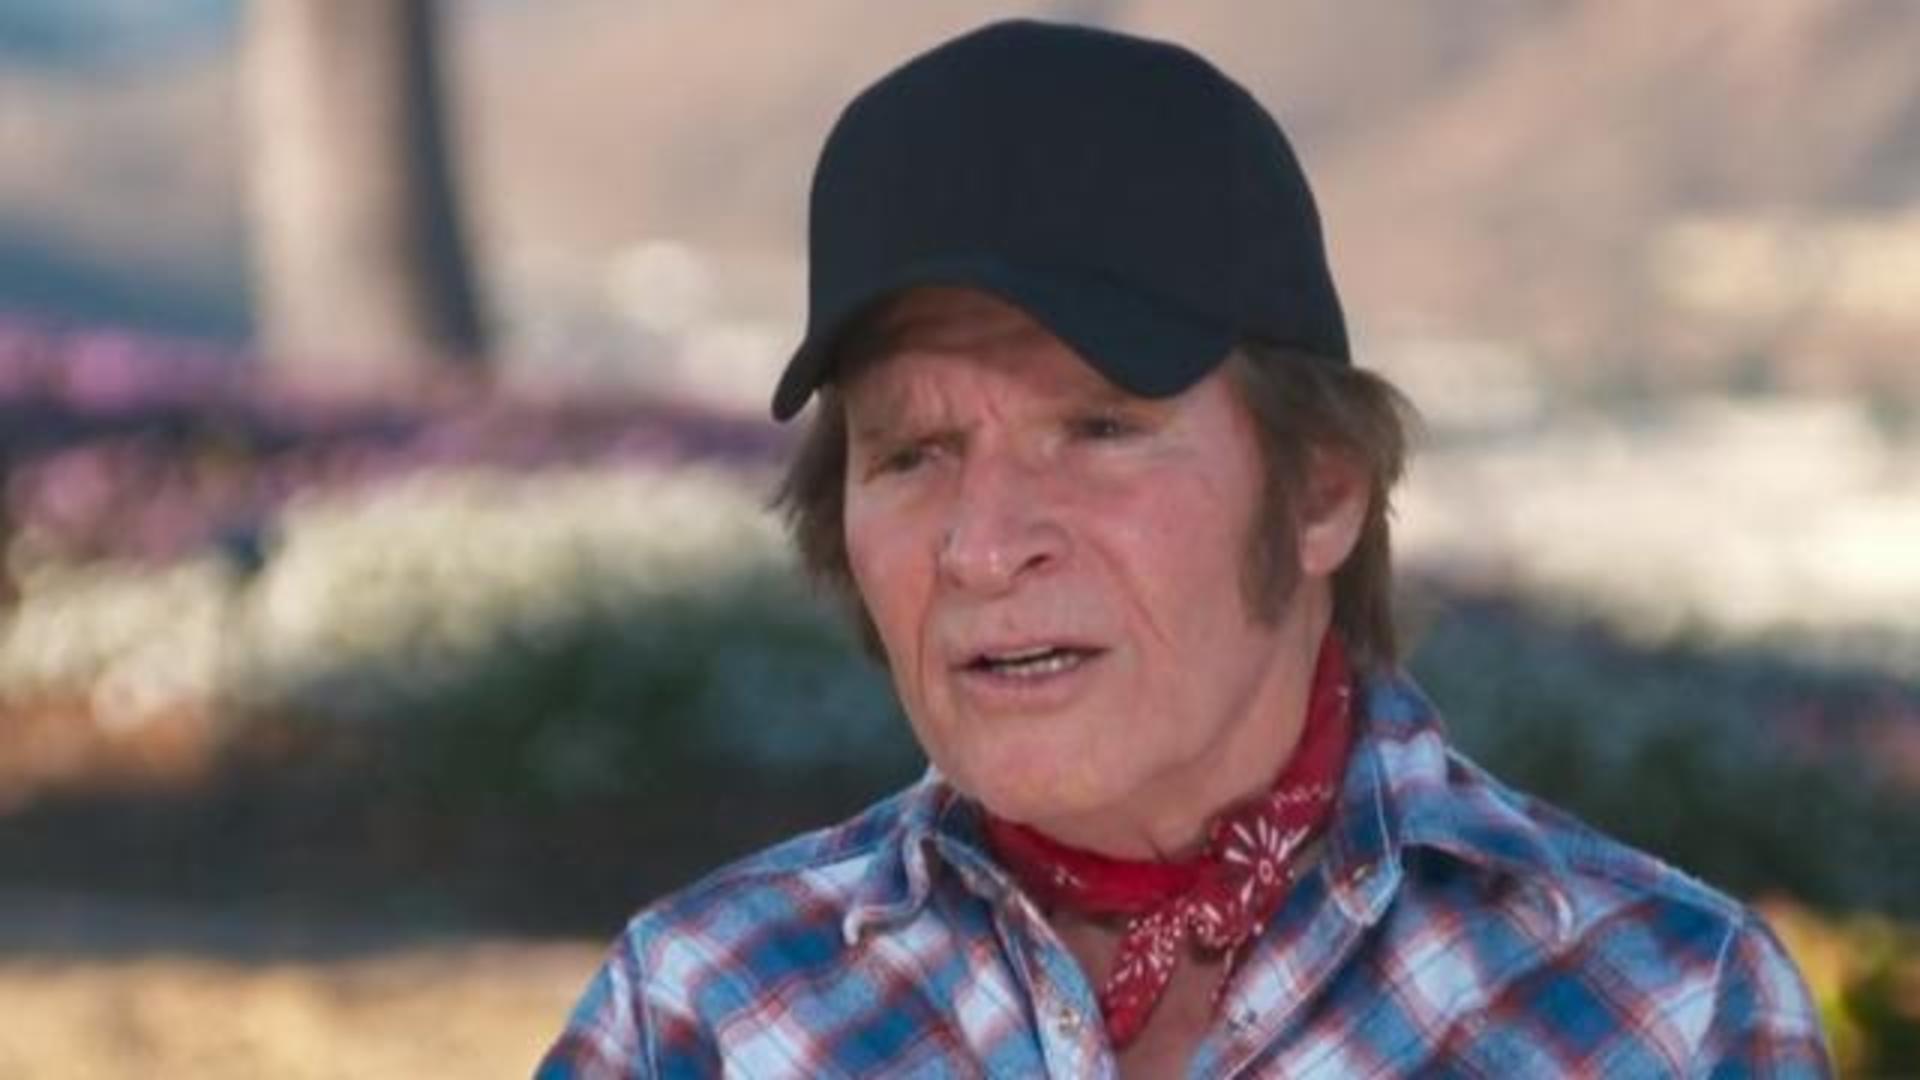 Rock 'n' roll legend John Fogerty on new protest song tackling